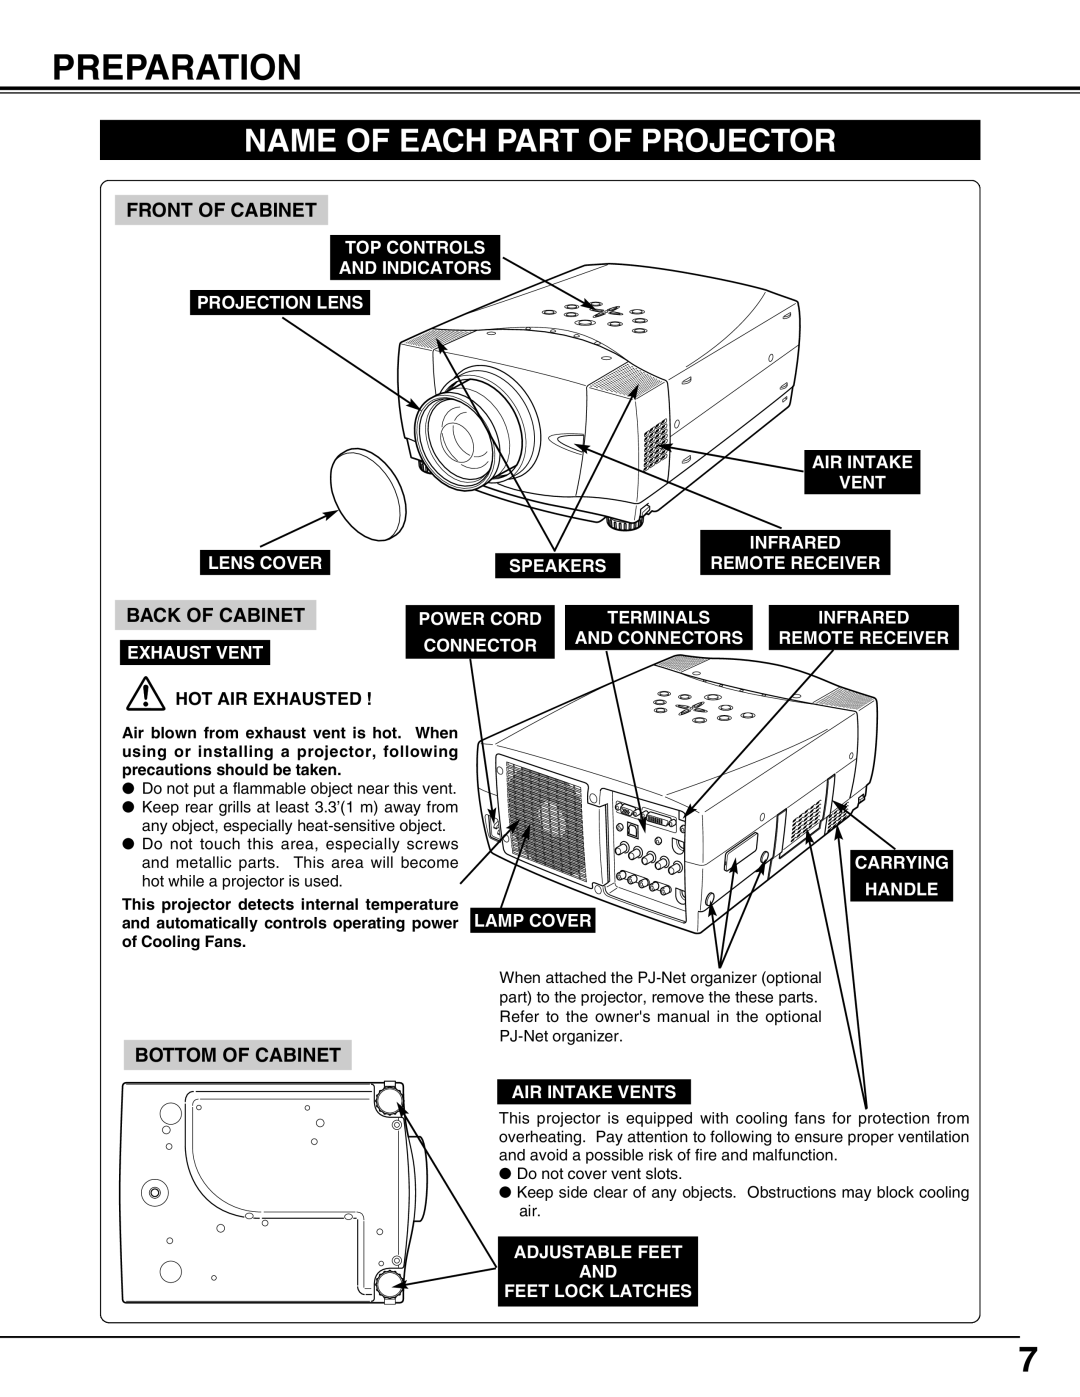 Sanyo PLC-XP55L Preparation, Name Of Each Part Of Projector, Front Of Cabinet, Back Of Cabinet, Bottom Of Cabinet 